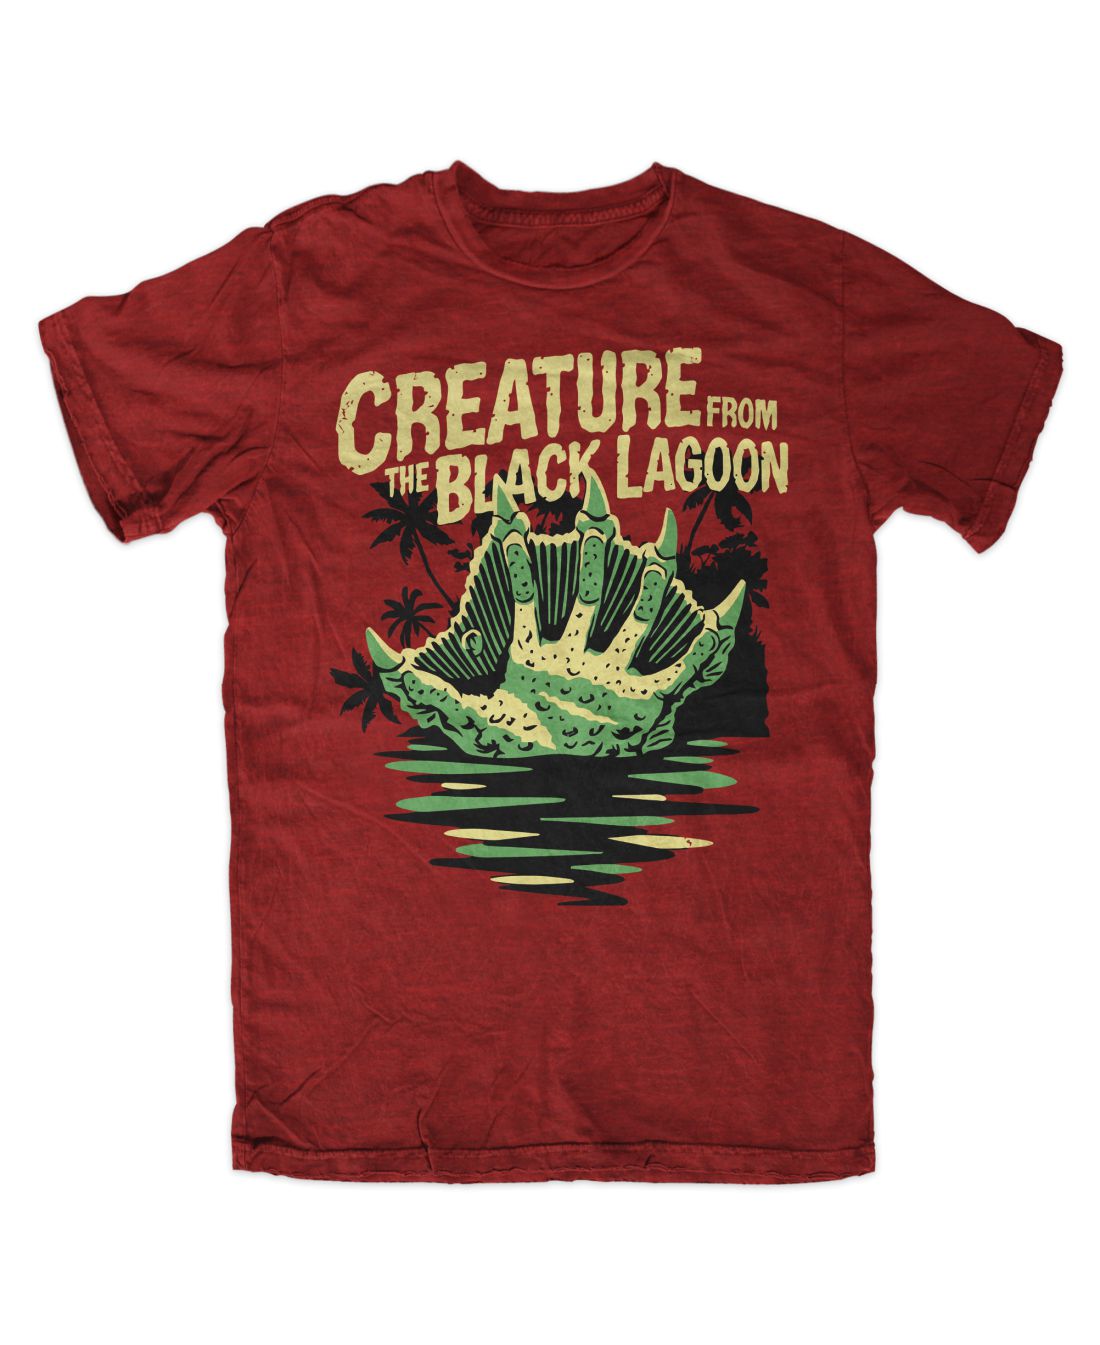 Creature From The Black Lagoon 002 (antique red póló)